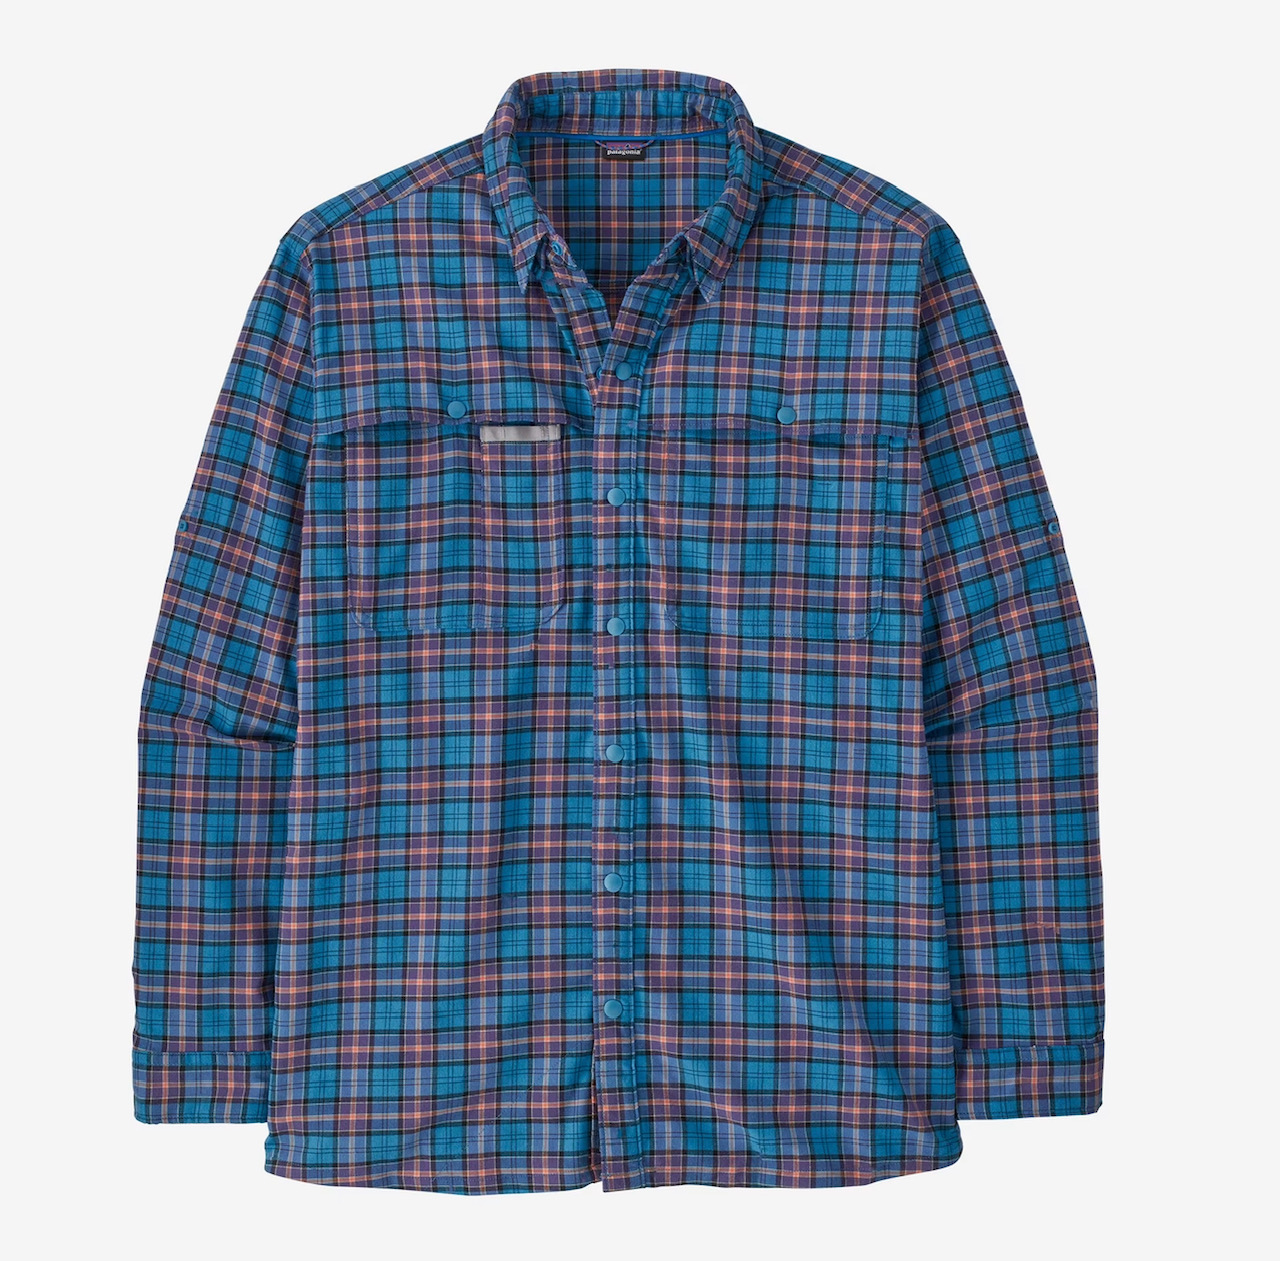 Patagonia M's Early Rise Stretch Shirt - On the Fly: Anacapa Blue - XL